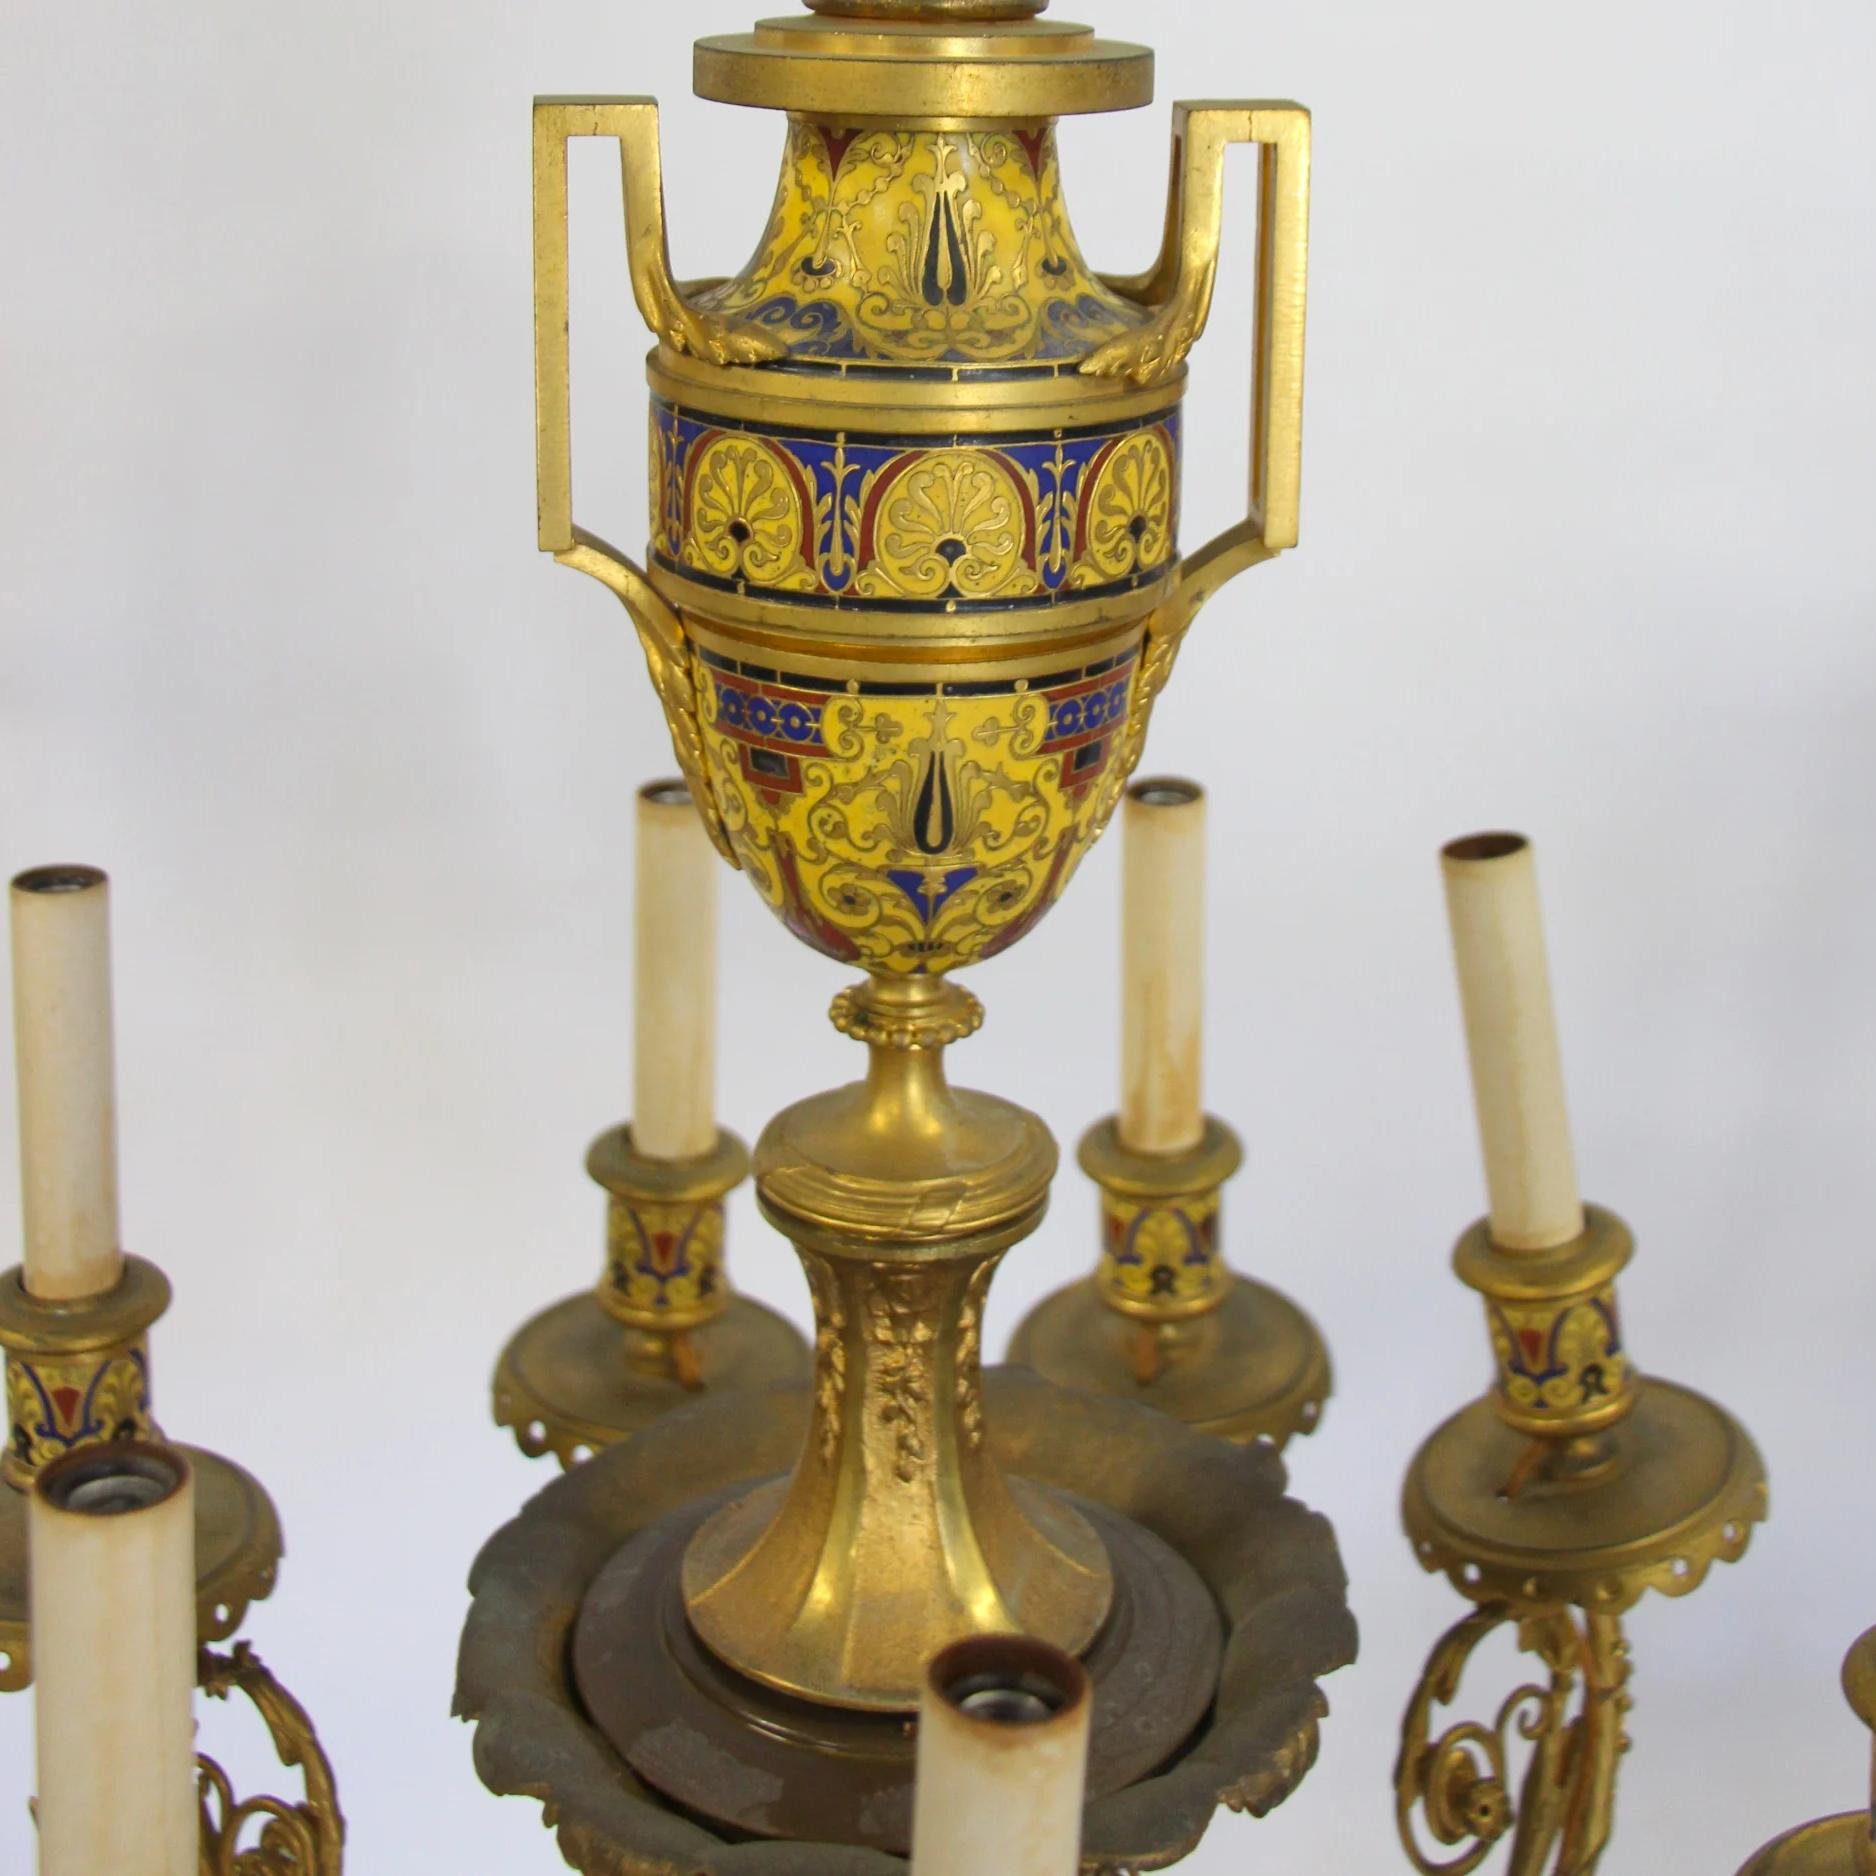 A fine quality French gilt-bronze champlevé enamel nine-light chandelier attributed to Barbedienne

Maker: Attributed to Ferdinand Barbedienne (1810-1892)
Date: 19th century
Origin: French
Dimension: 25 x 21 inches.

 